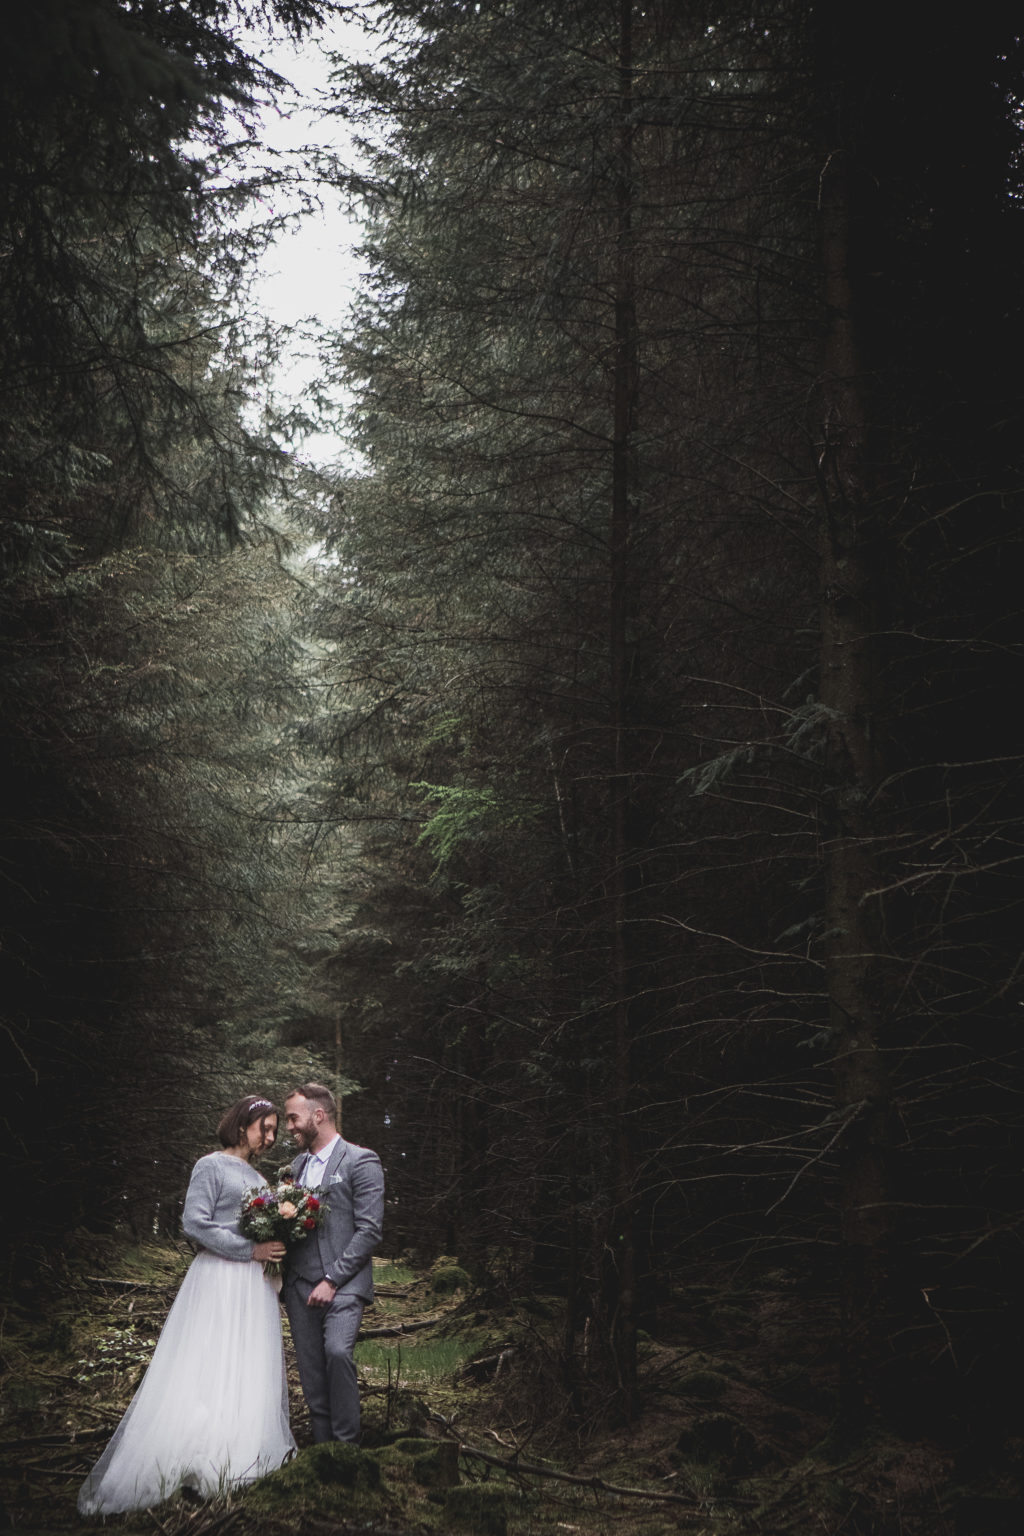 Whimsical Woodland Wedding With Ethical Styling and Accessories